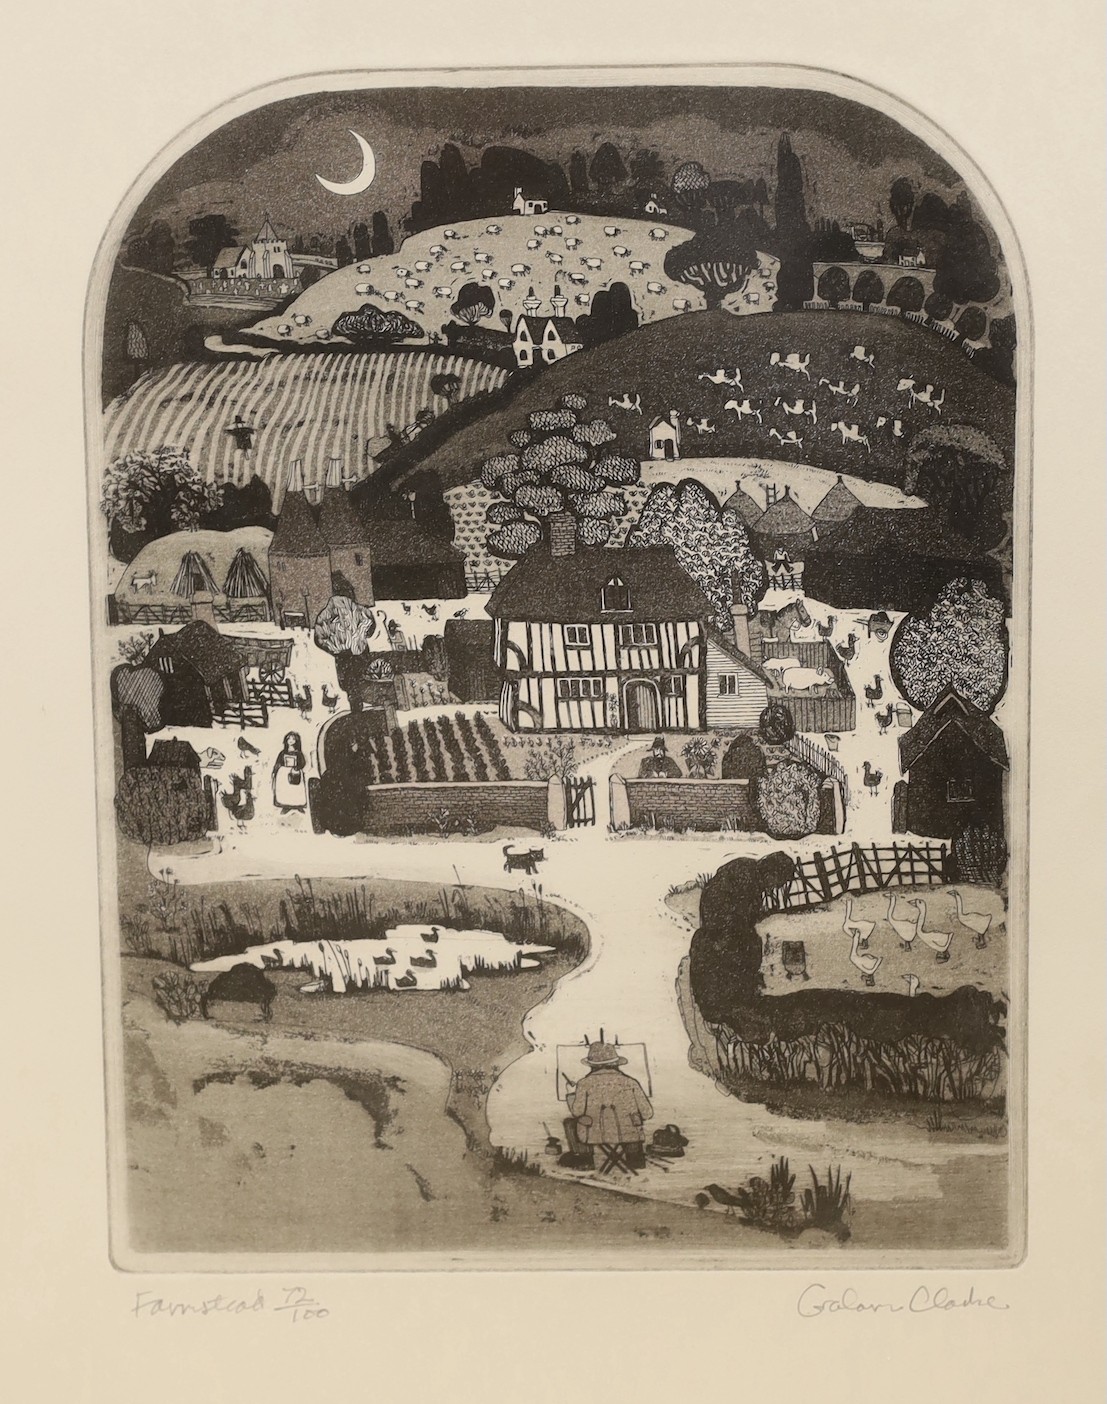 Graham Clarke (1941-), etching and aquatint, Farmstead, signed in pencil, 72/100, 34 x 26cm